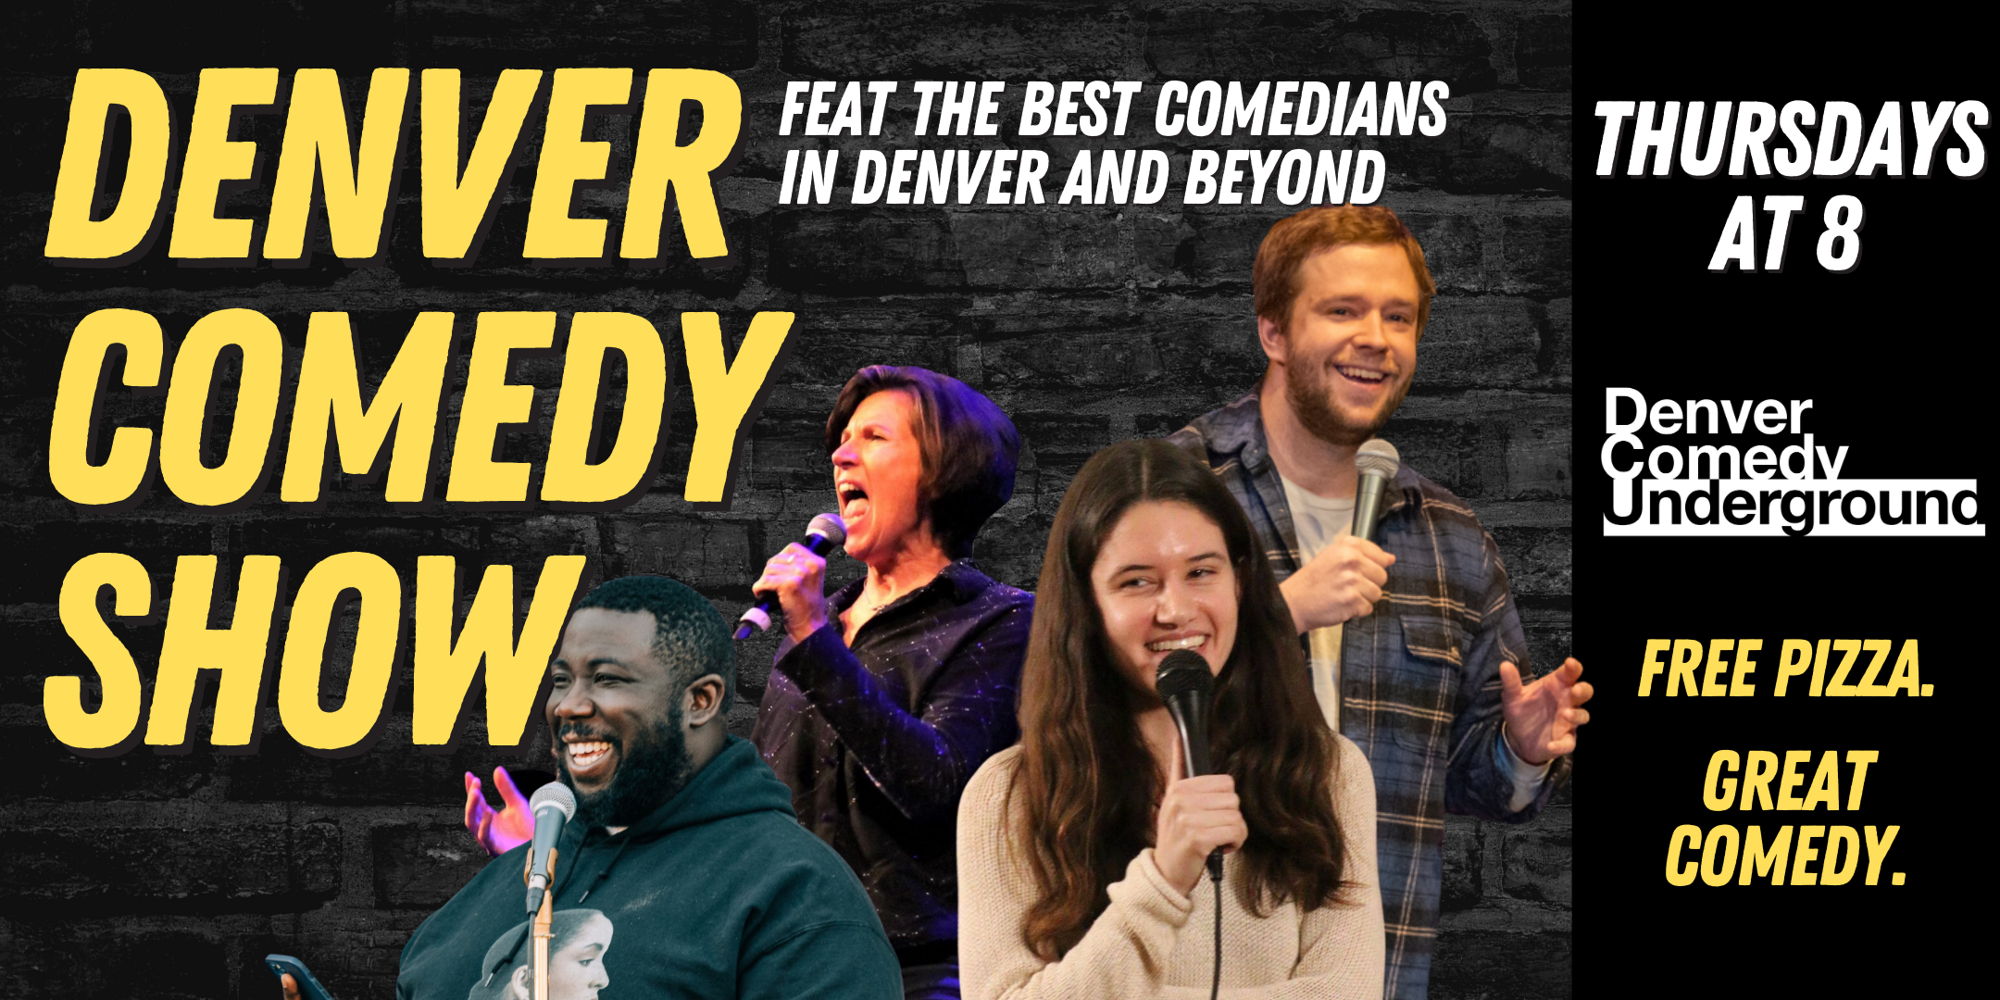 Denver Comedy Show At Denver Comedy Underground! Free Pizza And The Best Comedy! promotional image